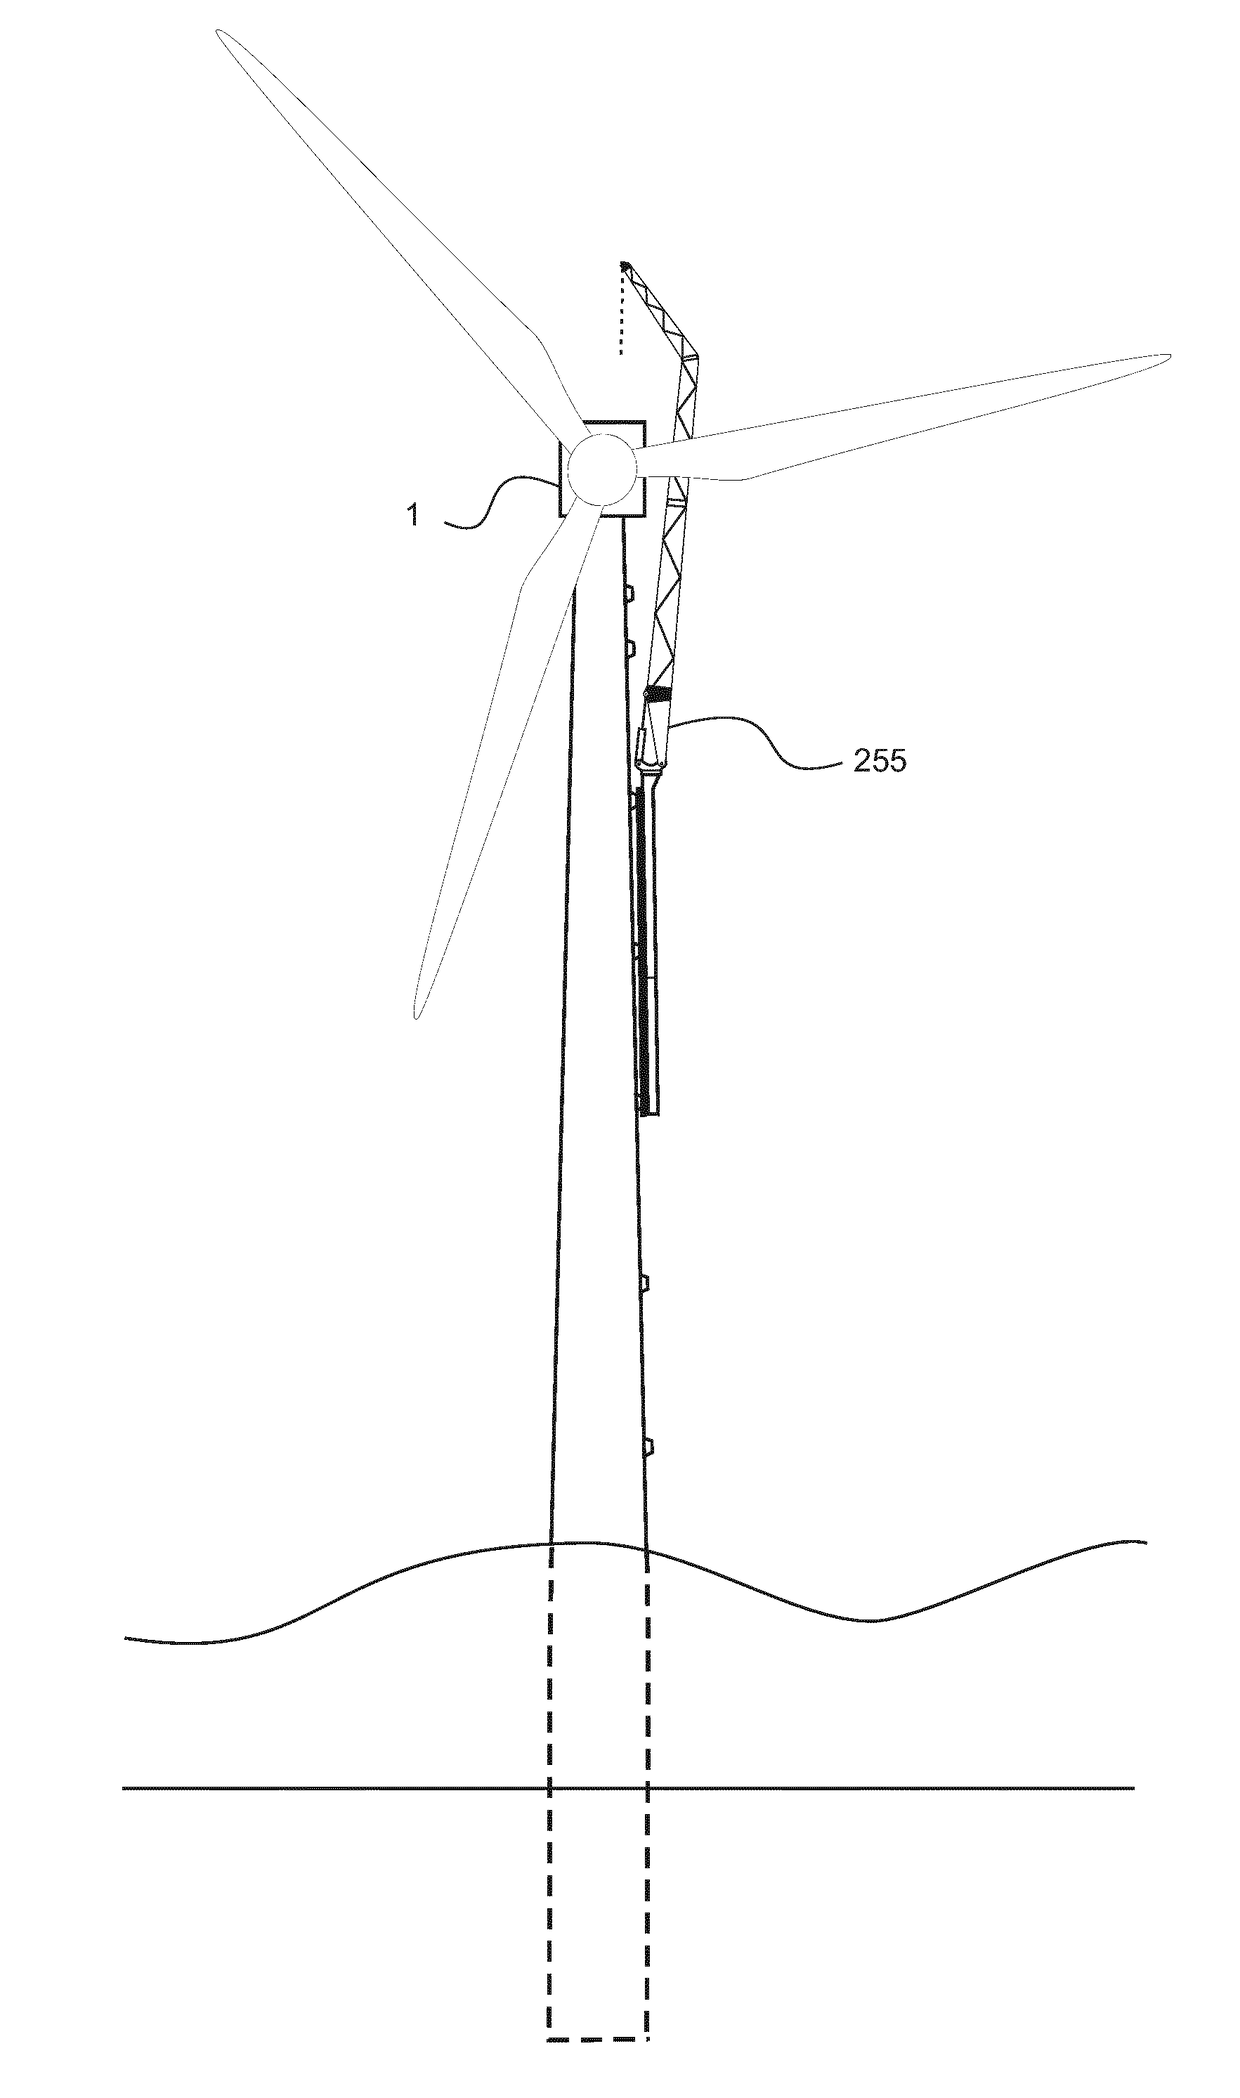 Hoisting system for installing a wind turbine